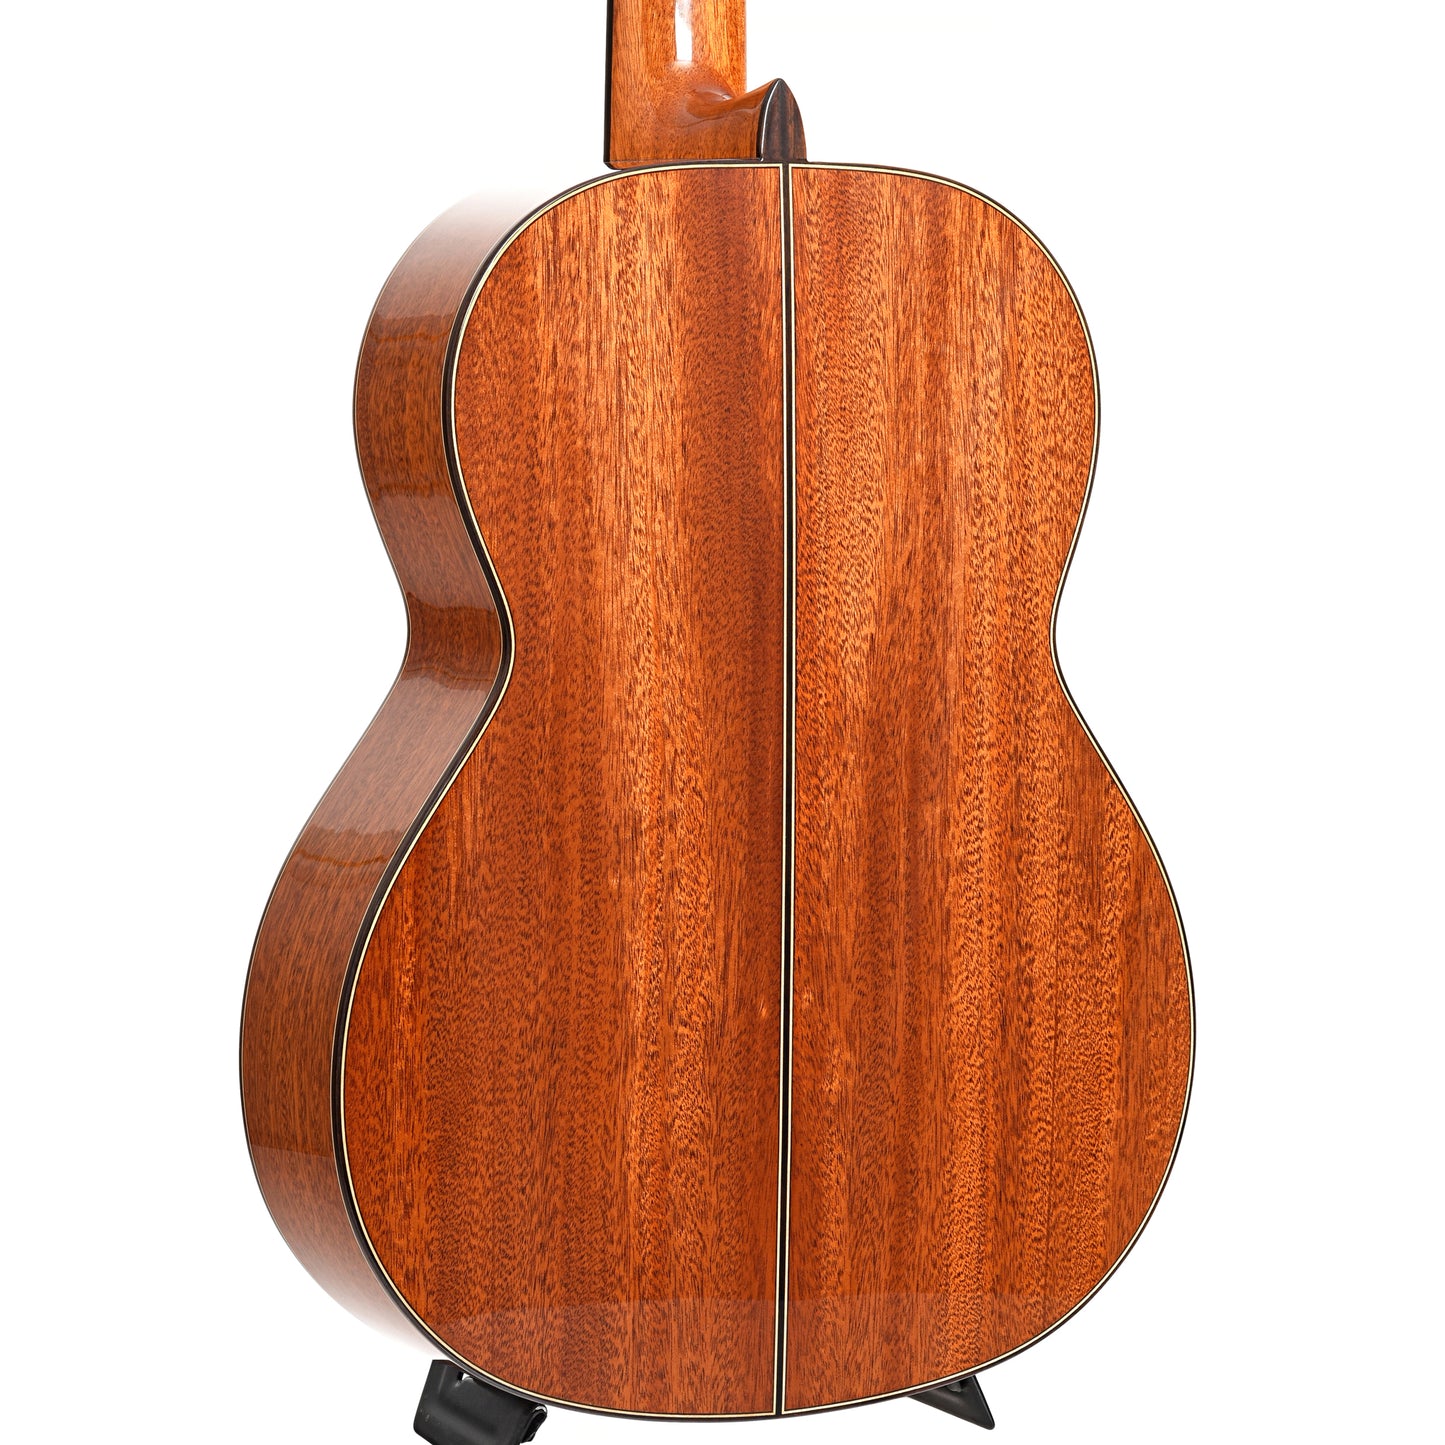 Image 10 of Cordoba C9 Classical Guitar and Case - SKU# CORC9C : Product Type Classical & Flamenco Guitars : Elderly Instruments